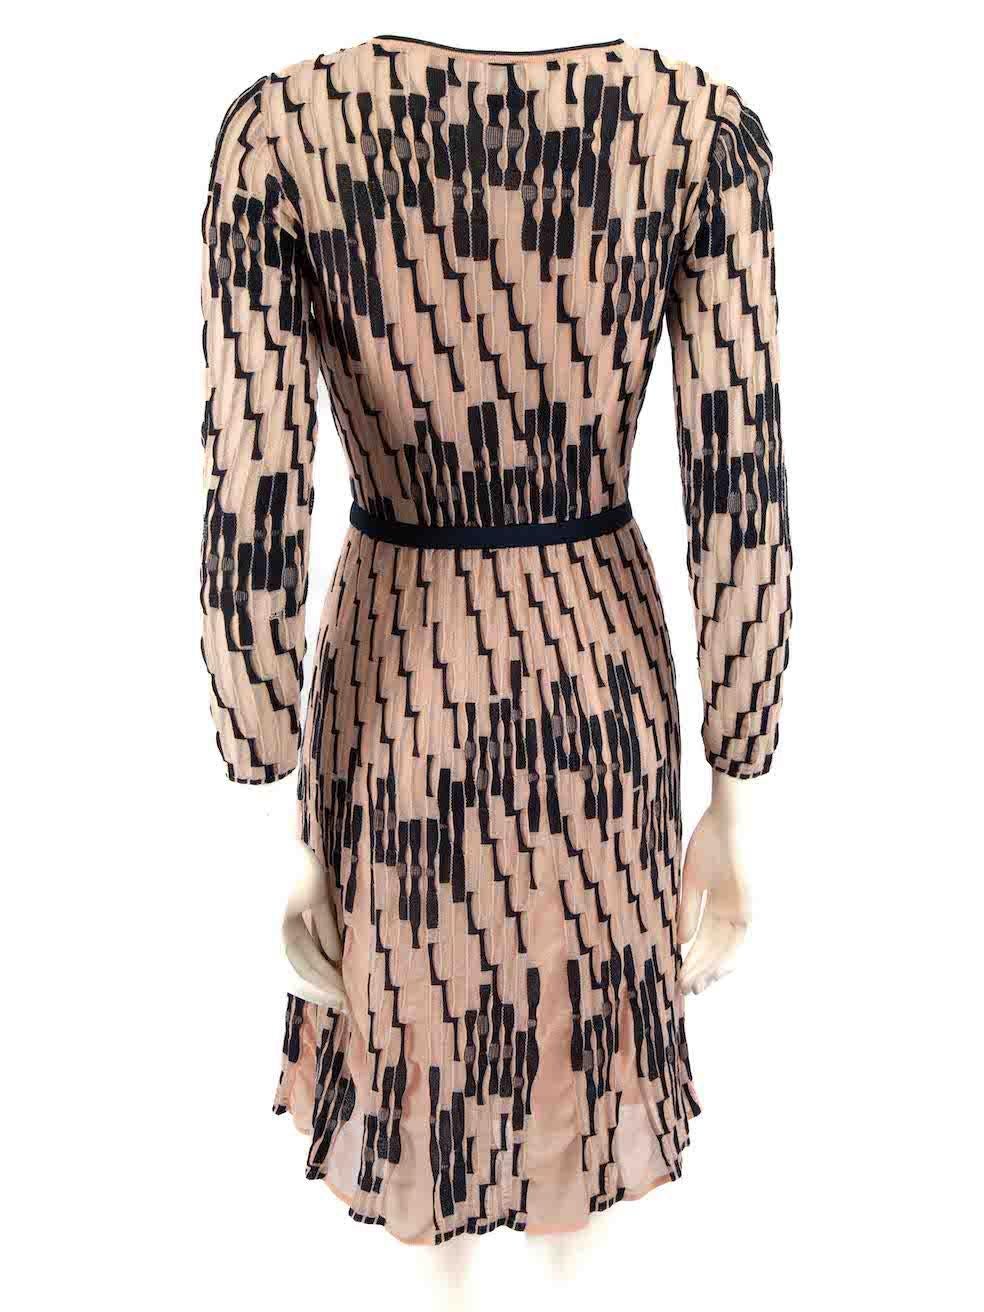 Missoni M Missoni Pink Abstract Knit Knee Length Dress Size S In Good Condition For Sale In London, GB